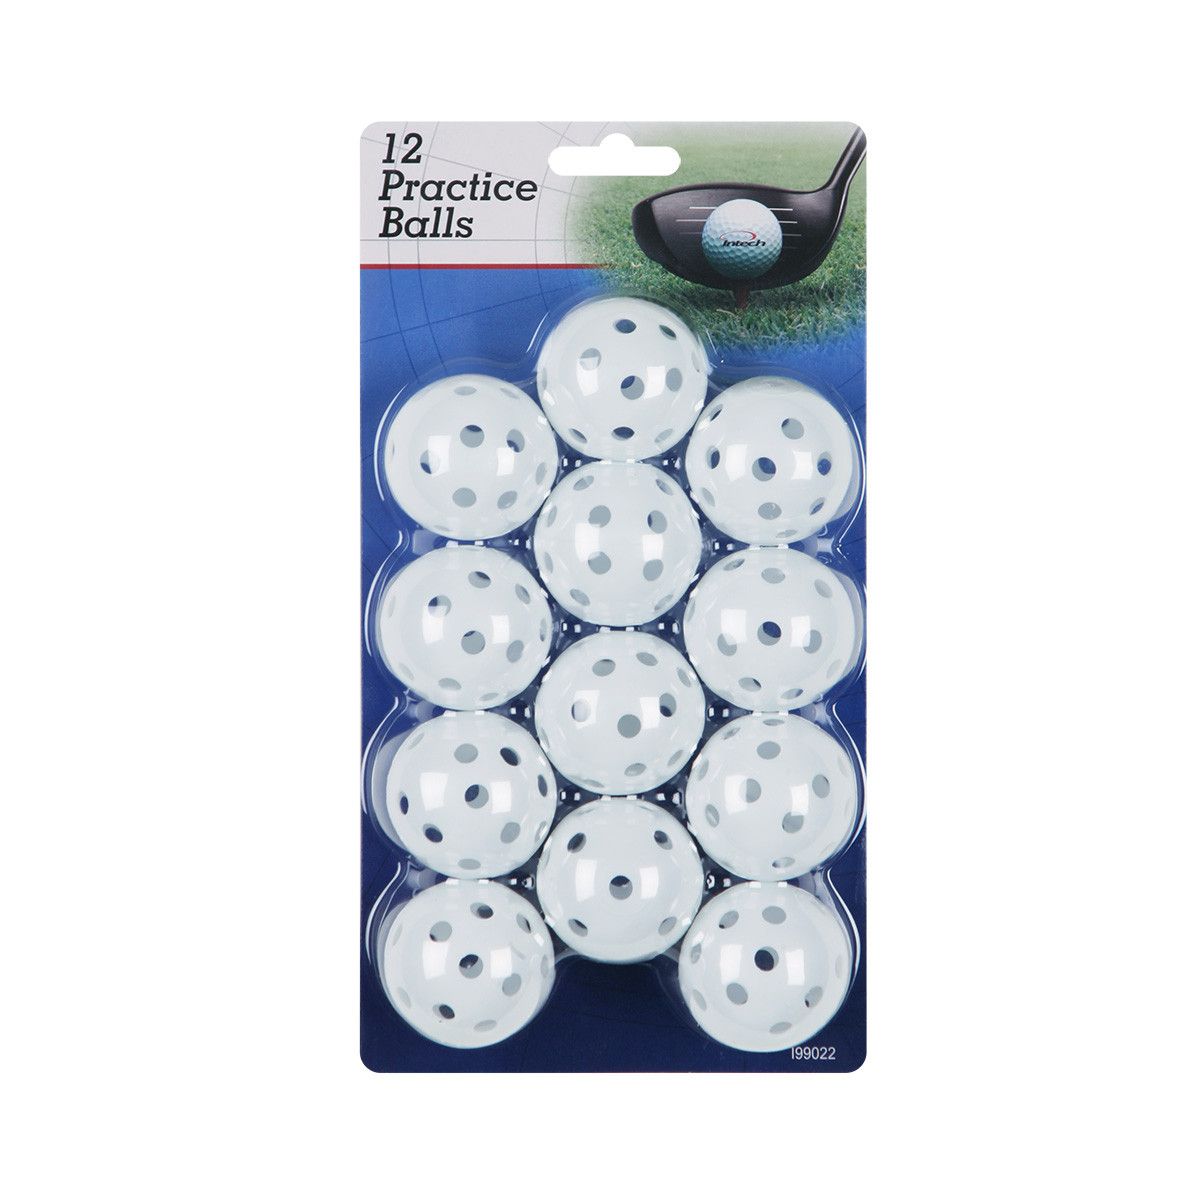 12 white Intech Practice Golf Balls with Air Holes in retail packaging